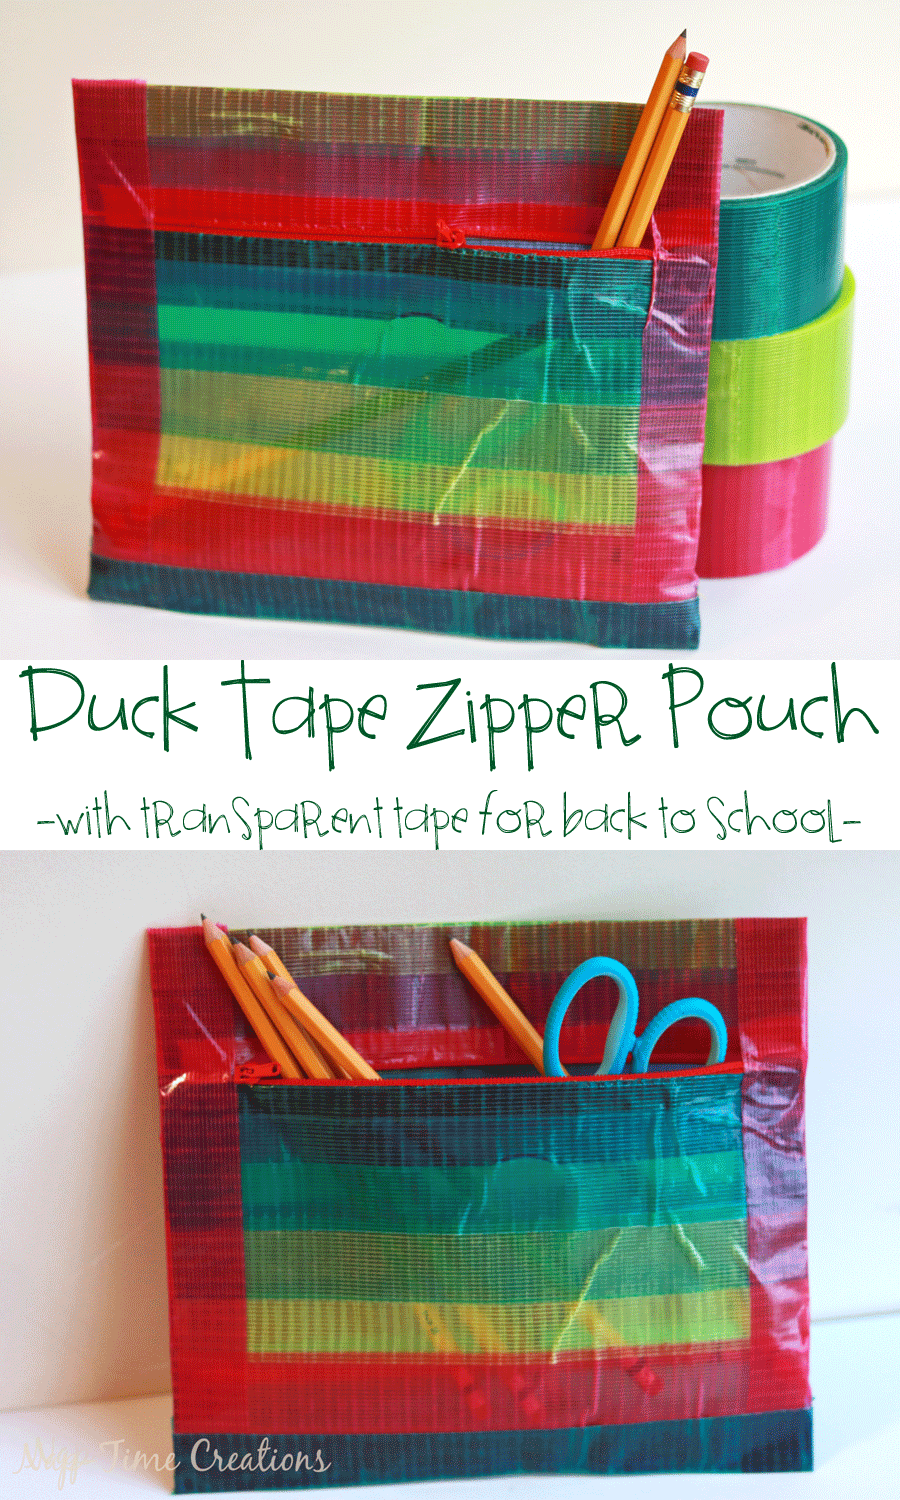 Duck Tape Zipper Pouch with-transparent-tape-a-no-sew-project-for-back-to-school